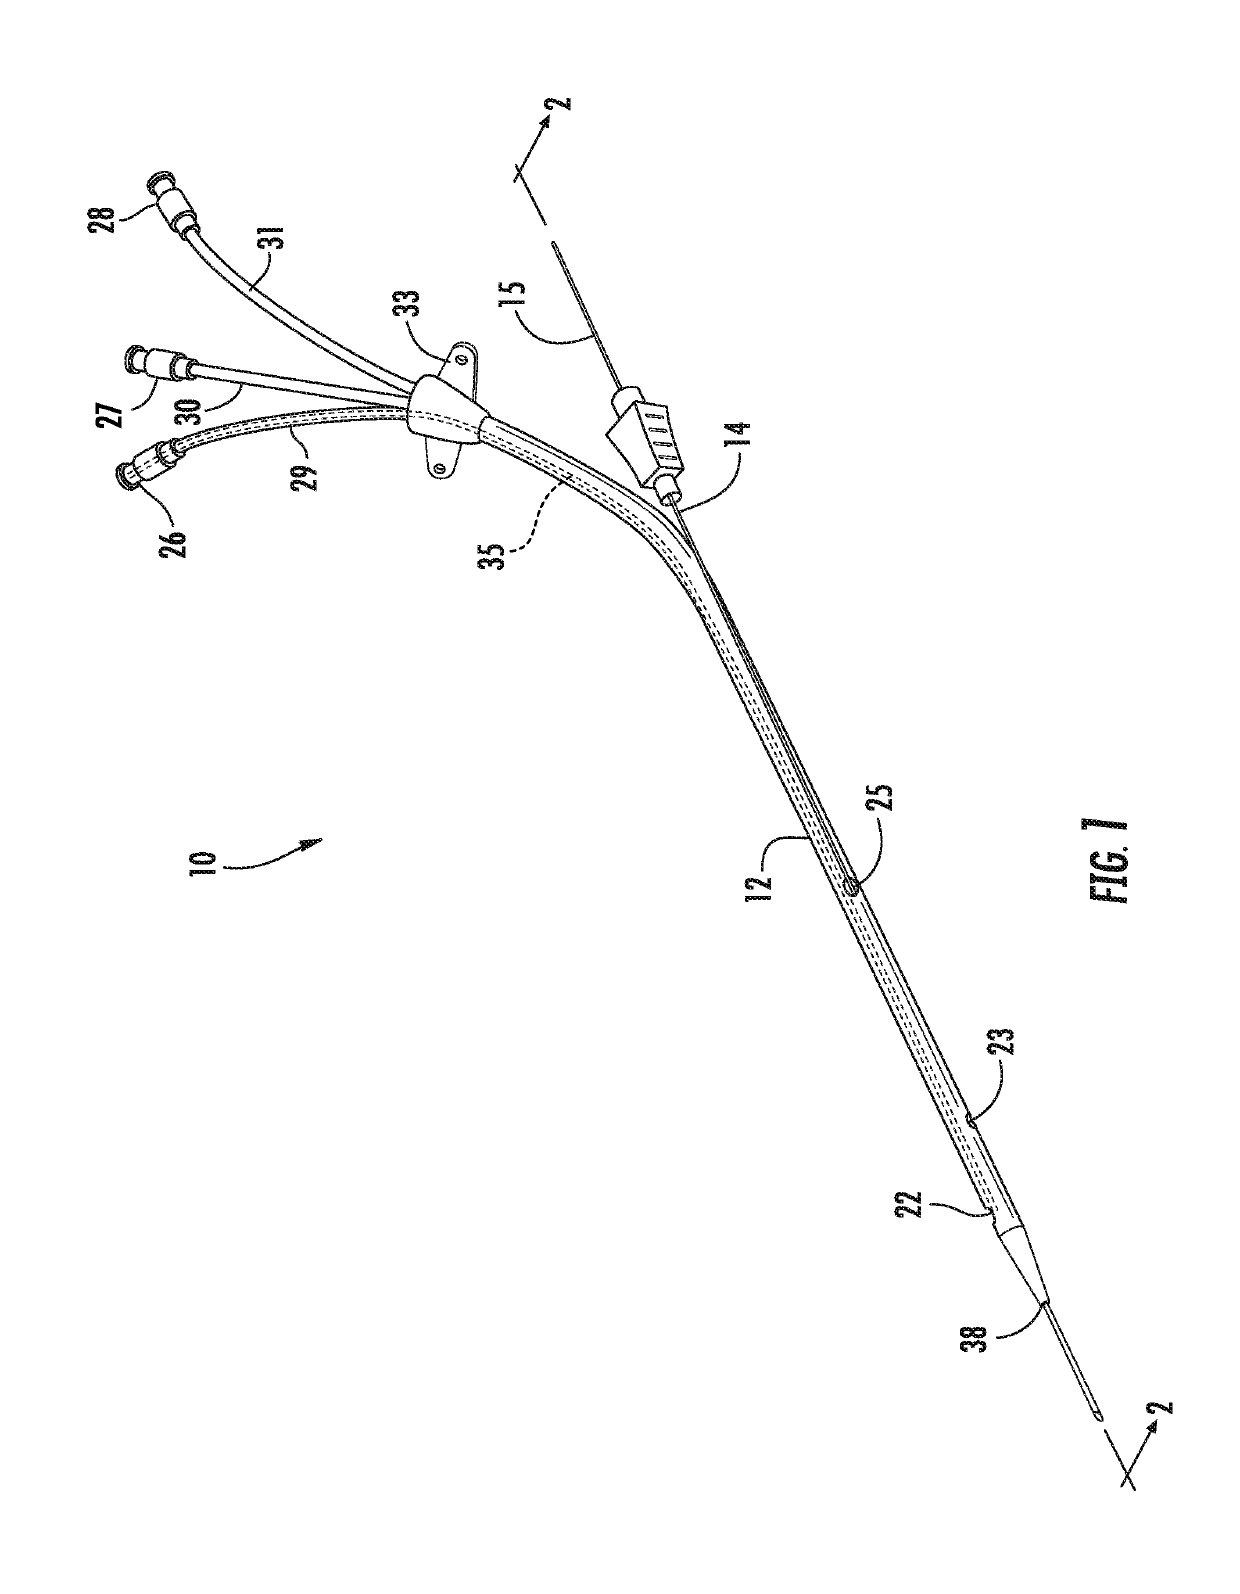 Rapid insertion integrated catheter and method of using an integrated catheter